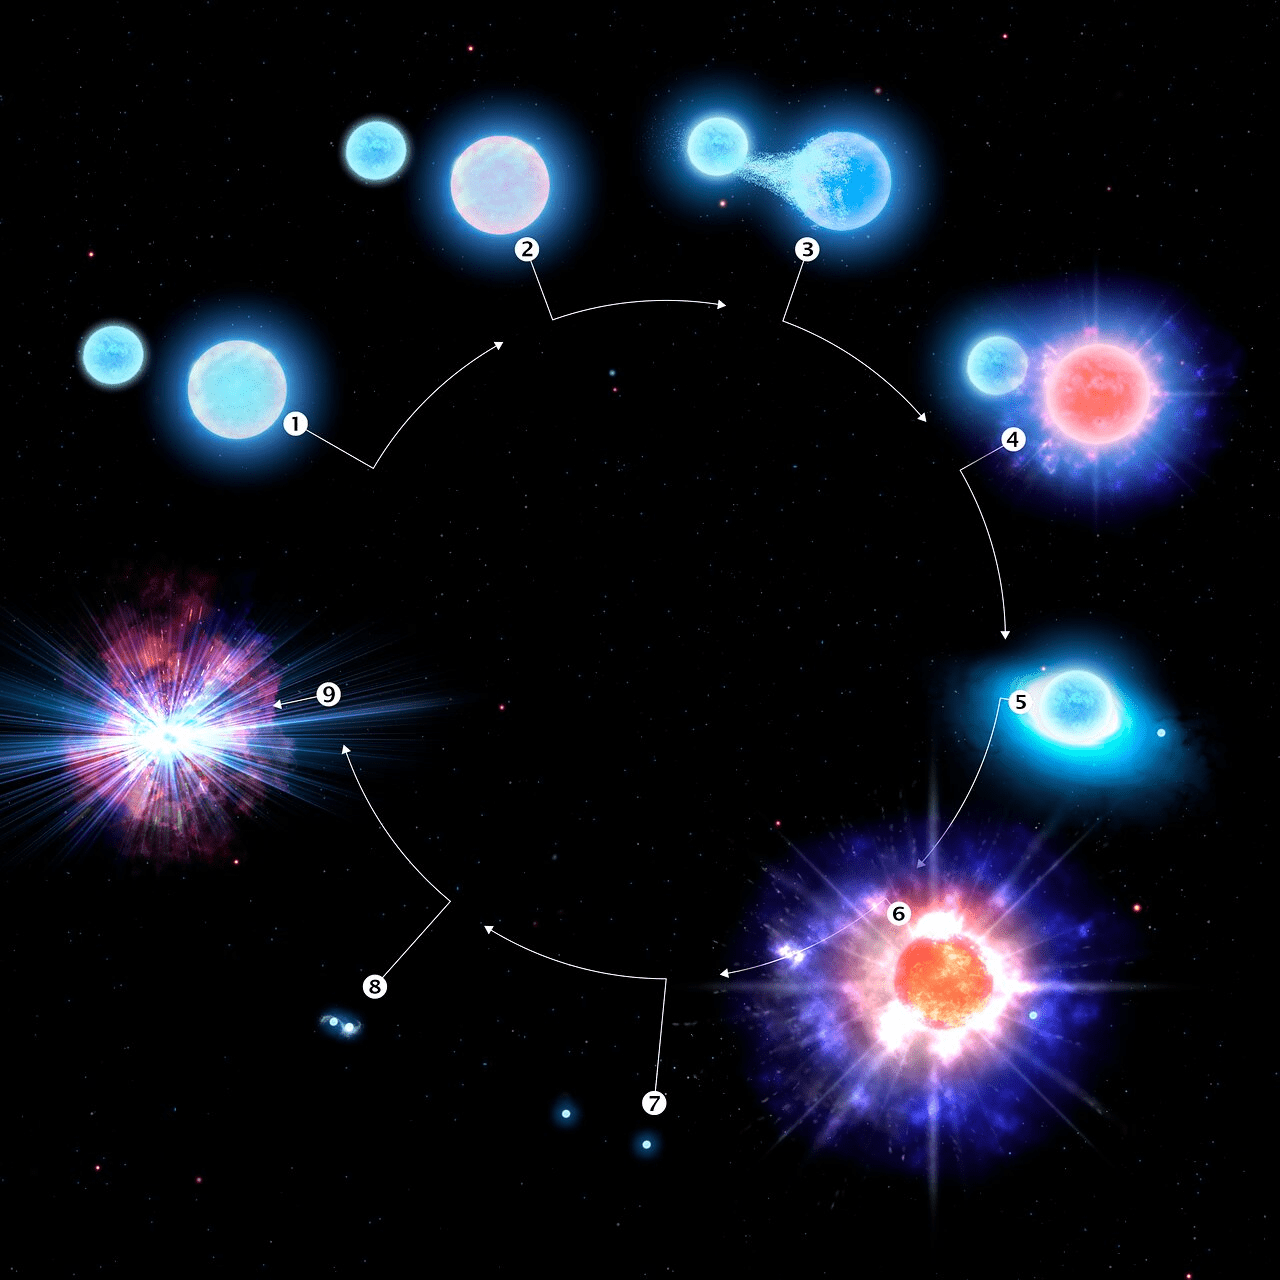 The evolution of CPD-29 2176, 1, two massive blue stars form in a binary star system. 2, the larger star nears the end. 3, the smaller star siphons off material from its larger, more mature companion,.4, the larger star forms an ultra-stripped supernova 5, Currently the resulting neutron star is siphoning off material from its companion. 6, The companion star also undergoes an ultra-stripped supernova. 7, a pair of neutron stars remain. 8, the two neutron stars spiral into toward each other, 9 A kilonova, the cosmic factory of heavy elements in our Universe. 